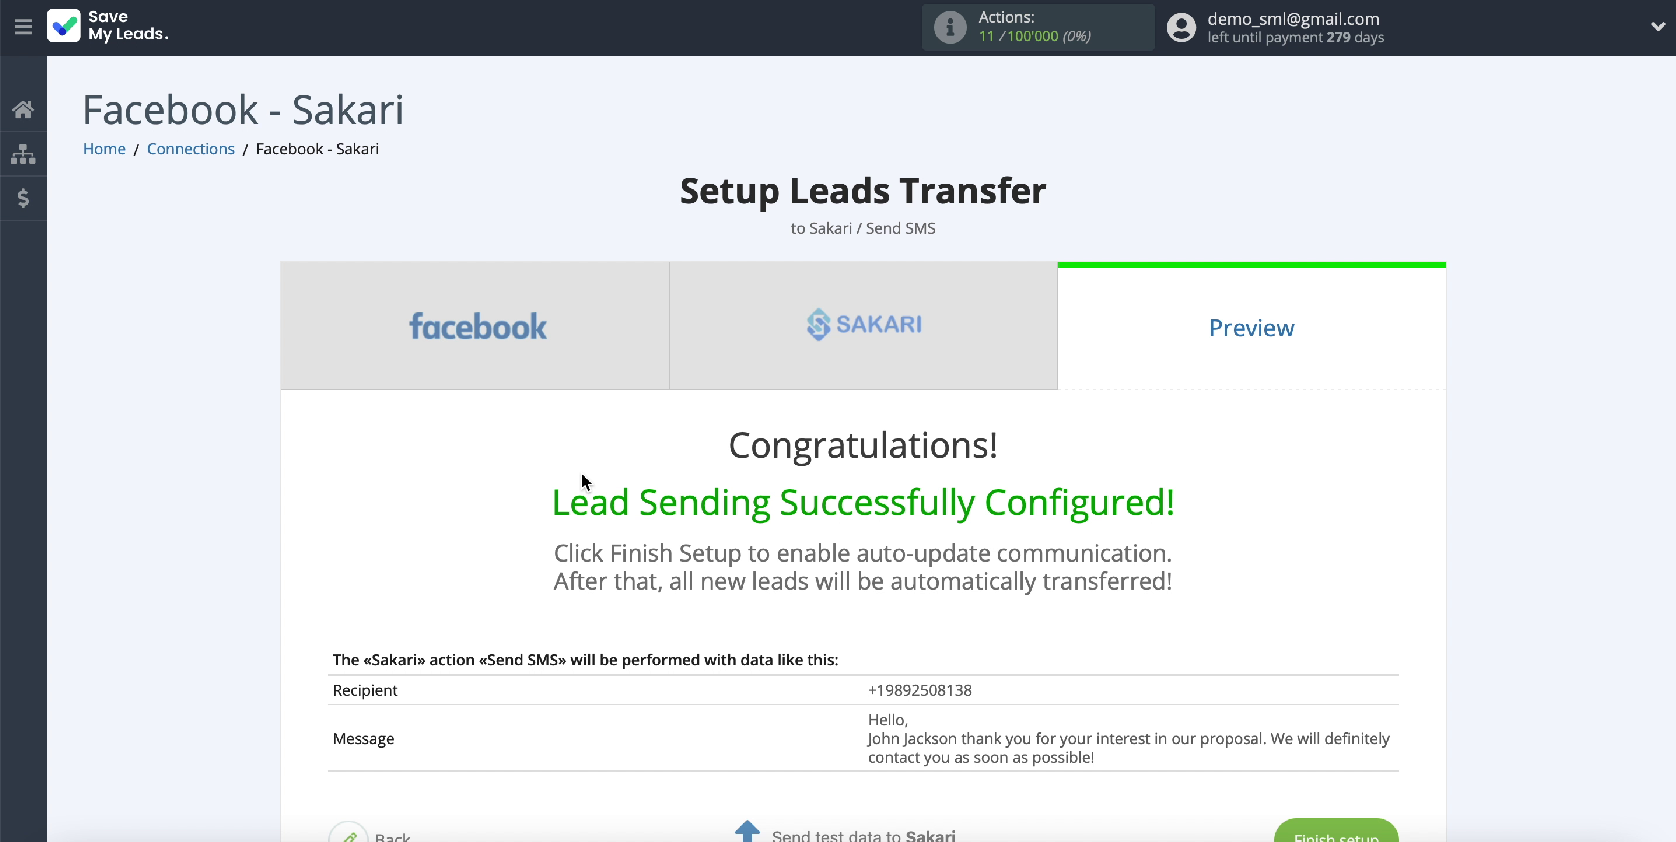 How to Send SMS via Sakari from New Facebook Leads | Sample message